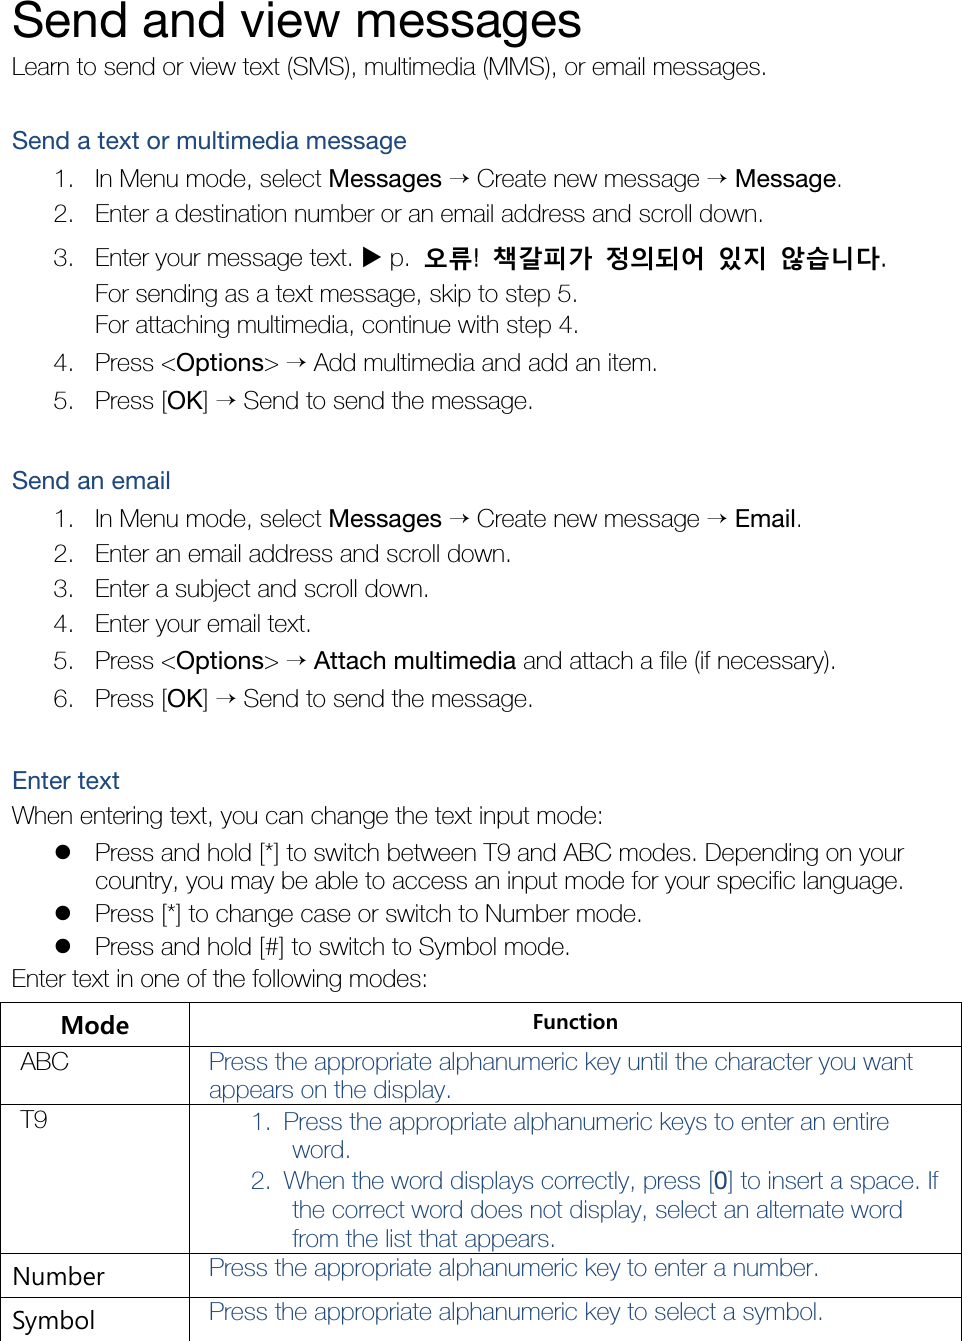    Send and view messages Learn to send or view text (SMS), multimedia (MMS), or email messages.  Send a text or multimedia message 1. In Menu mode, select Messages → Create new message → Message. 2. Enter a destination number or an email address and scroll down. 3. Enter your message text. X p.  오류!  책갈피가 정의되어 있지 않습니다. For sending as a text message, skip to step 5. For attaching multimedia, continue with step 4. 4. Press &lt;Options&gt; → Add multimedia and add an item. 5. Press [OK] → Send to send the message.  Send an email 1. In Menu mode, select Messages → Create new message → Email. 2. Enter an email address and scroll down. 3. Enter a subject and scroll down. 4. Enter your email text. 5. Press &lt;Options&gt; → Attach multimedia and attach a file (if necessary). 6. Press [OK] → Send to send the message.  Enter text When entering text, you can change the text input mode: z Press and hold [*] to switch between T9 and ABC modes. Depending on your country, you may be able to access an input mode for your specific language. z Press [*] to change case or switch to Number mode. z Press and hold [#] to switch to Symbol mode. Enter text in one of the following modes: Mode  Function ABC  Press the appropriate alphanumeric key until the character you want appears on the display. T9  1. Press the appropriate alphanumeric keys to enter an entire word. 2. When the word displays correctly, press [0] to insert a space. If the correct word does not display, select an alternate word from the list that appears. Number  Press the appropriate alphanumeric key to enter a number. Symbol  Press the appropriate alphanumeric key to select a symbol. 